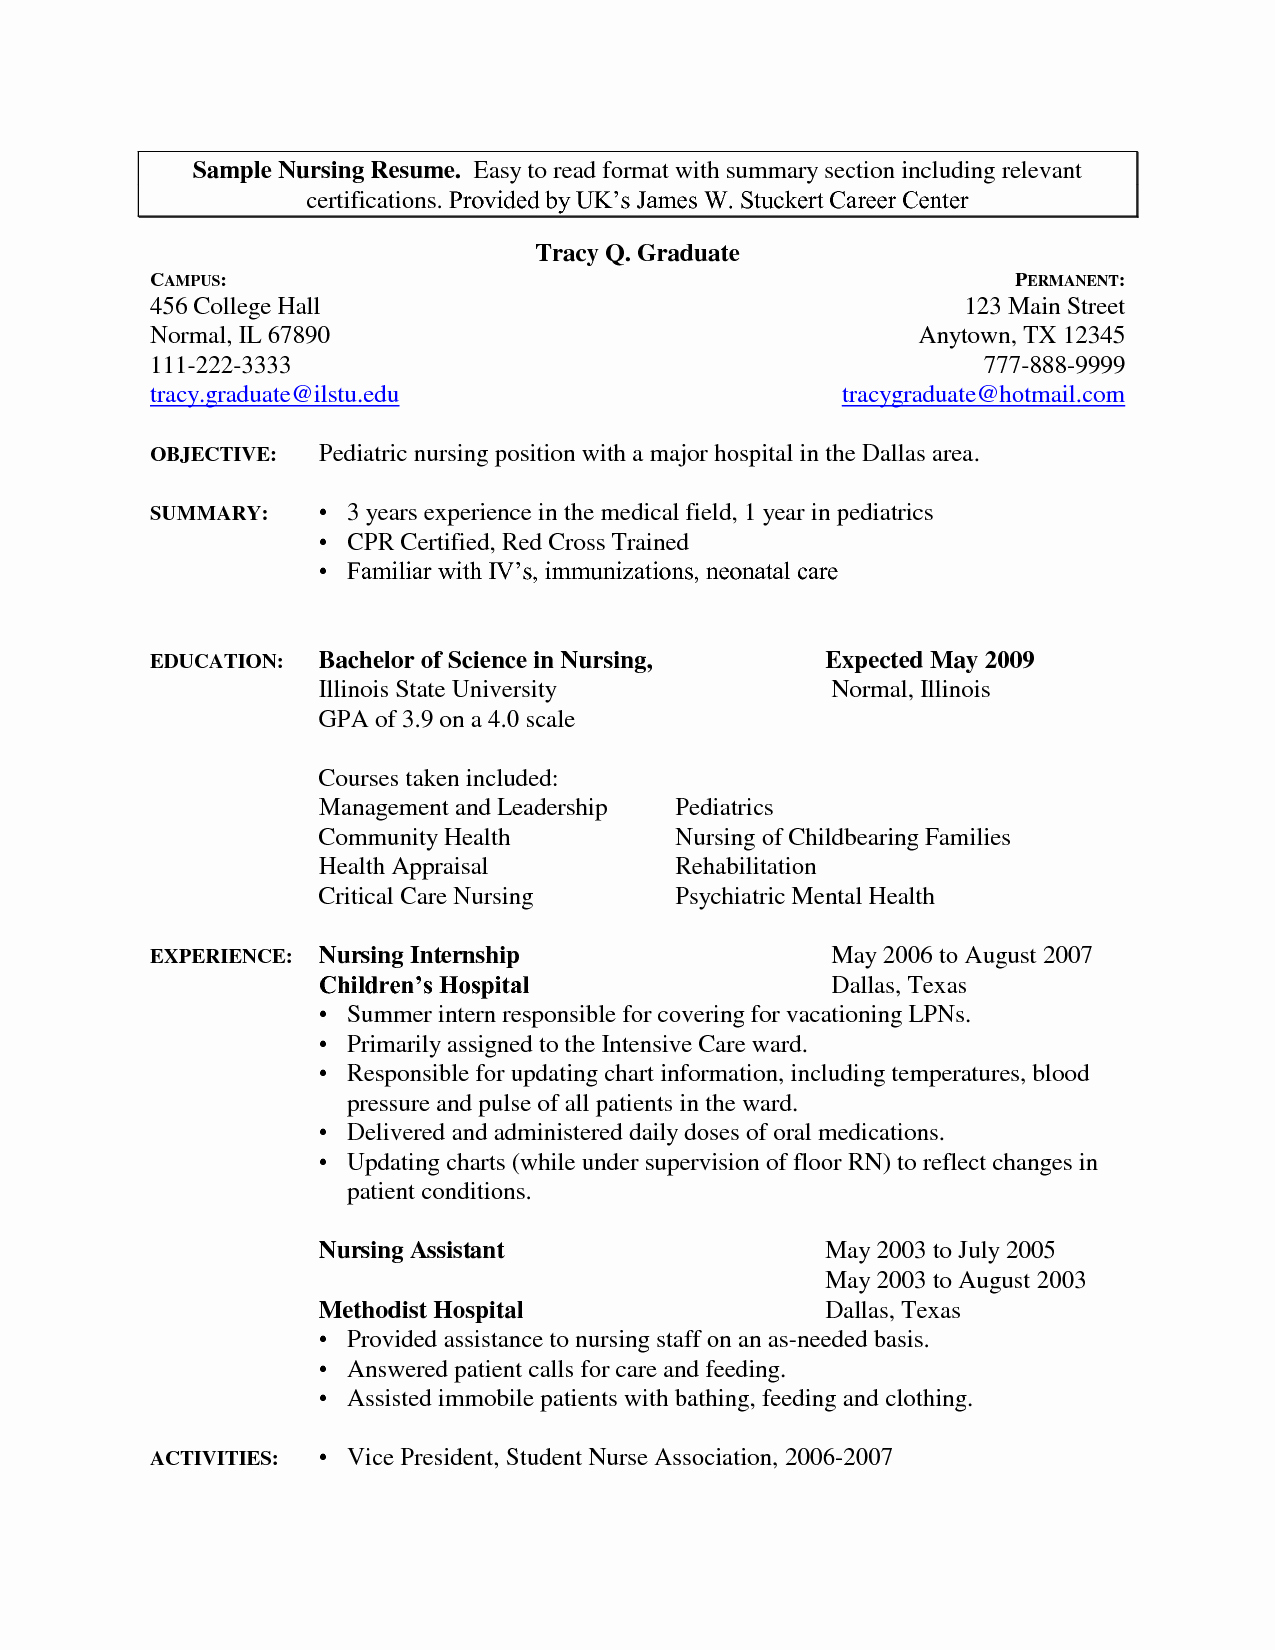 Medical assistant Student Resume Resume Ideas